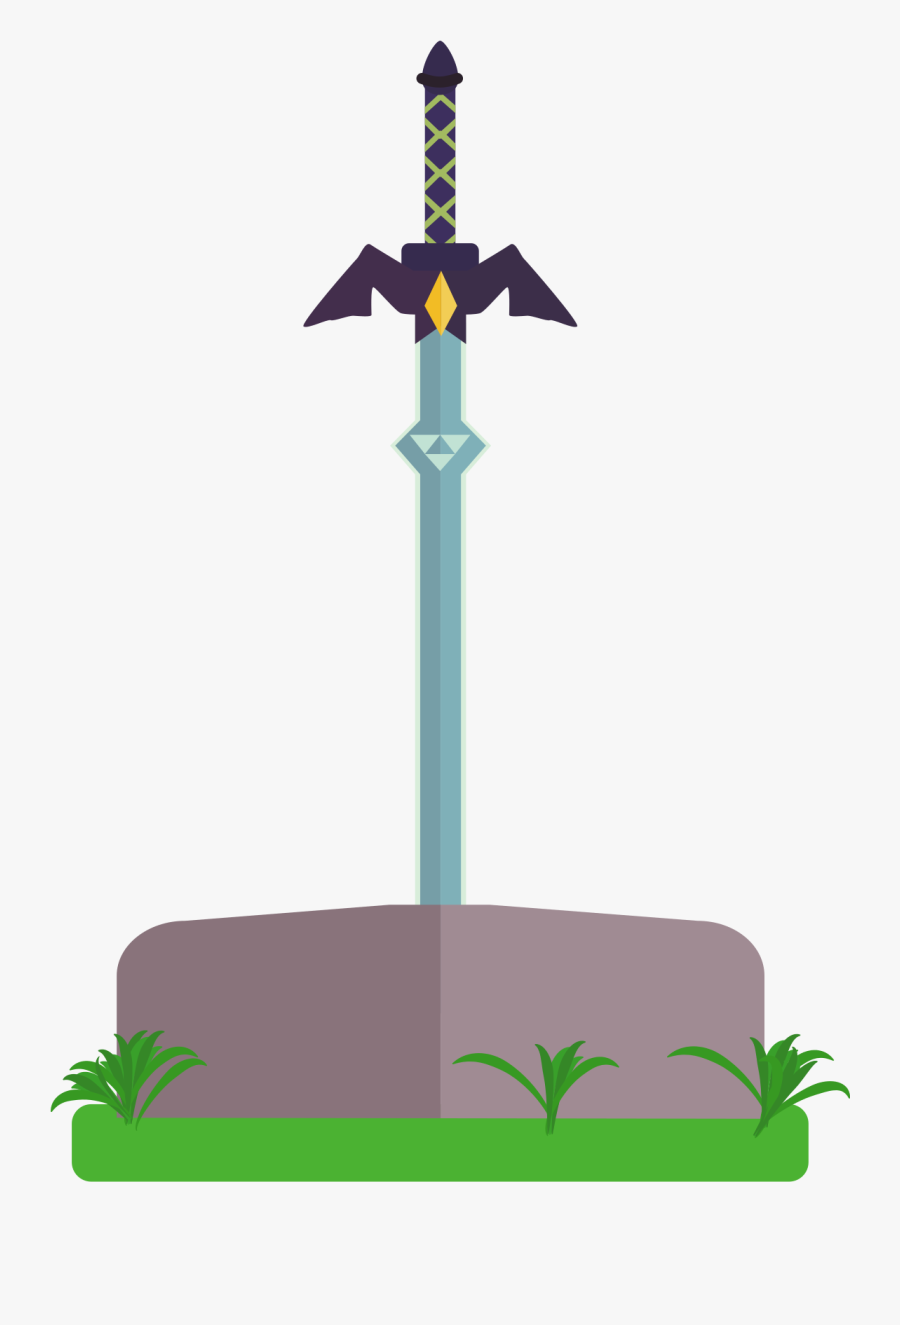 Master Sword Sword Weapon Free Picture - Master Sword Art, Transparent Clipart